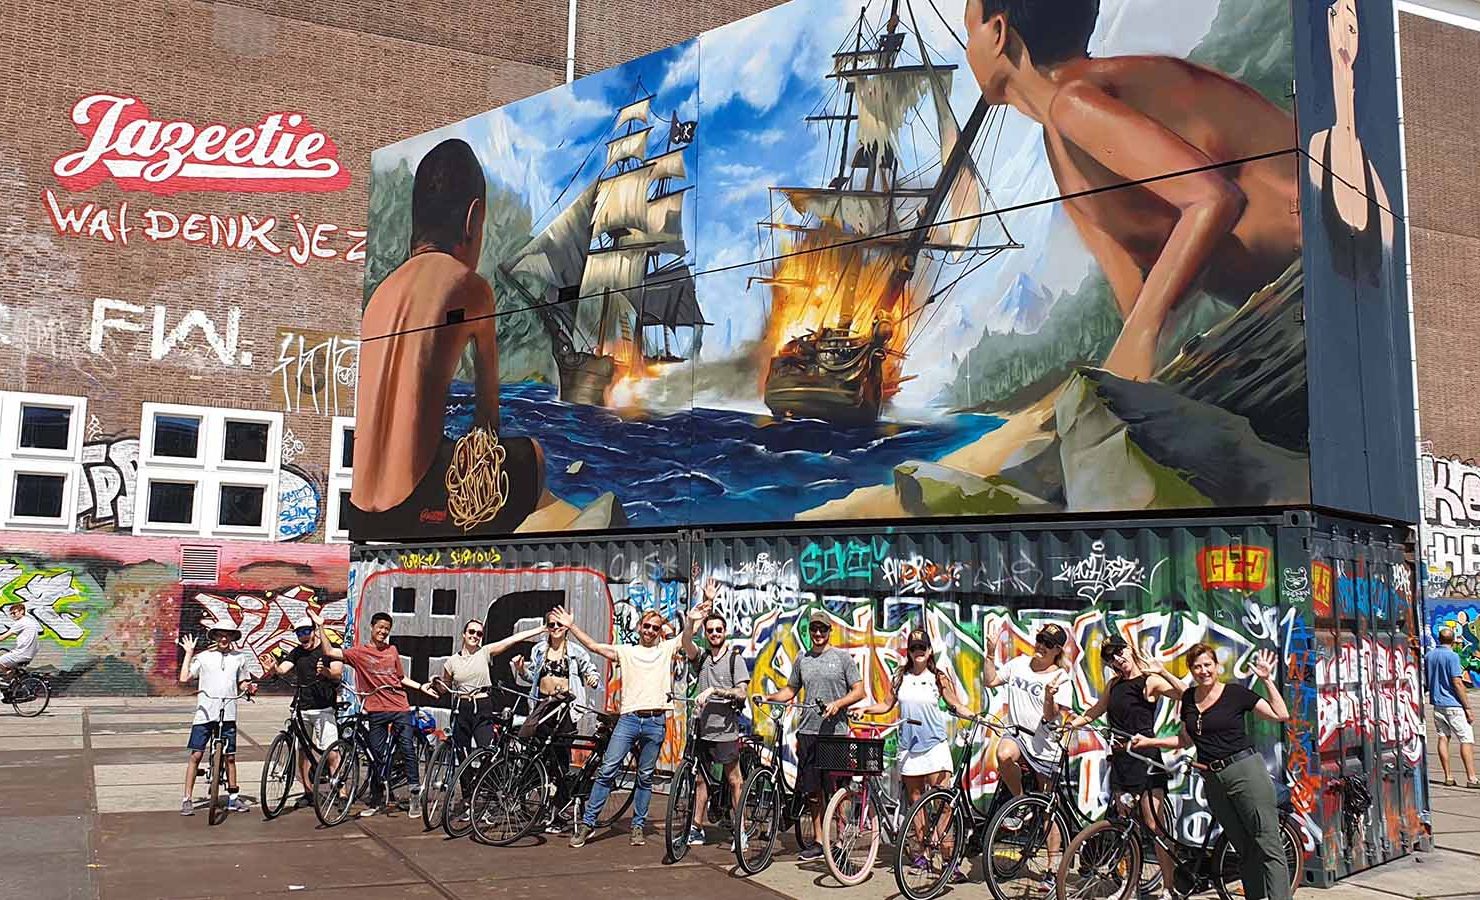 Bill’s Bike Tour (Private Tour) – Top Rated and Safest Bike Tour in Amsterdam